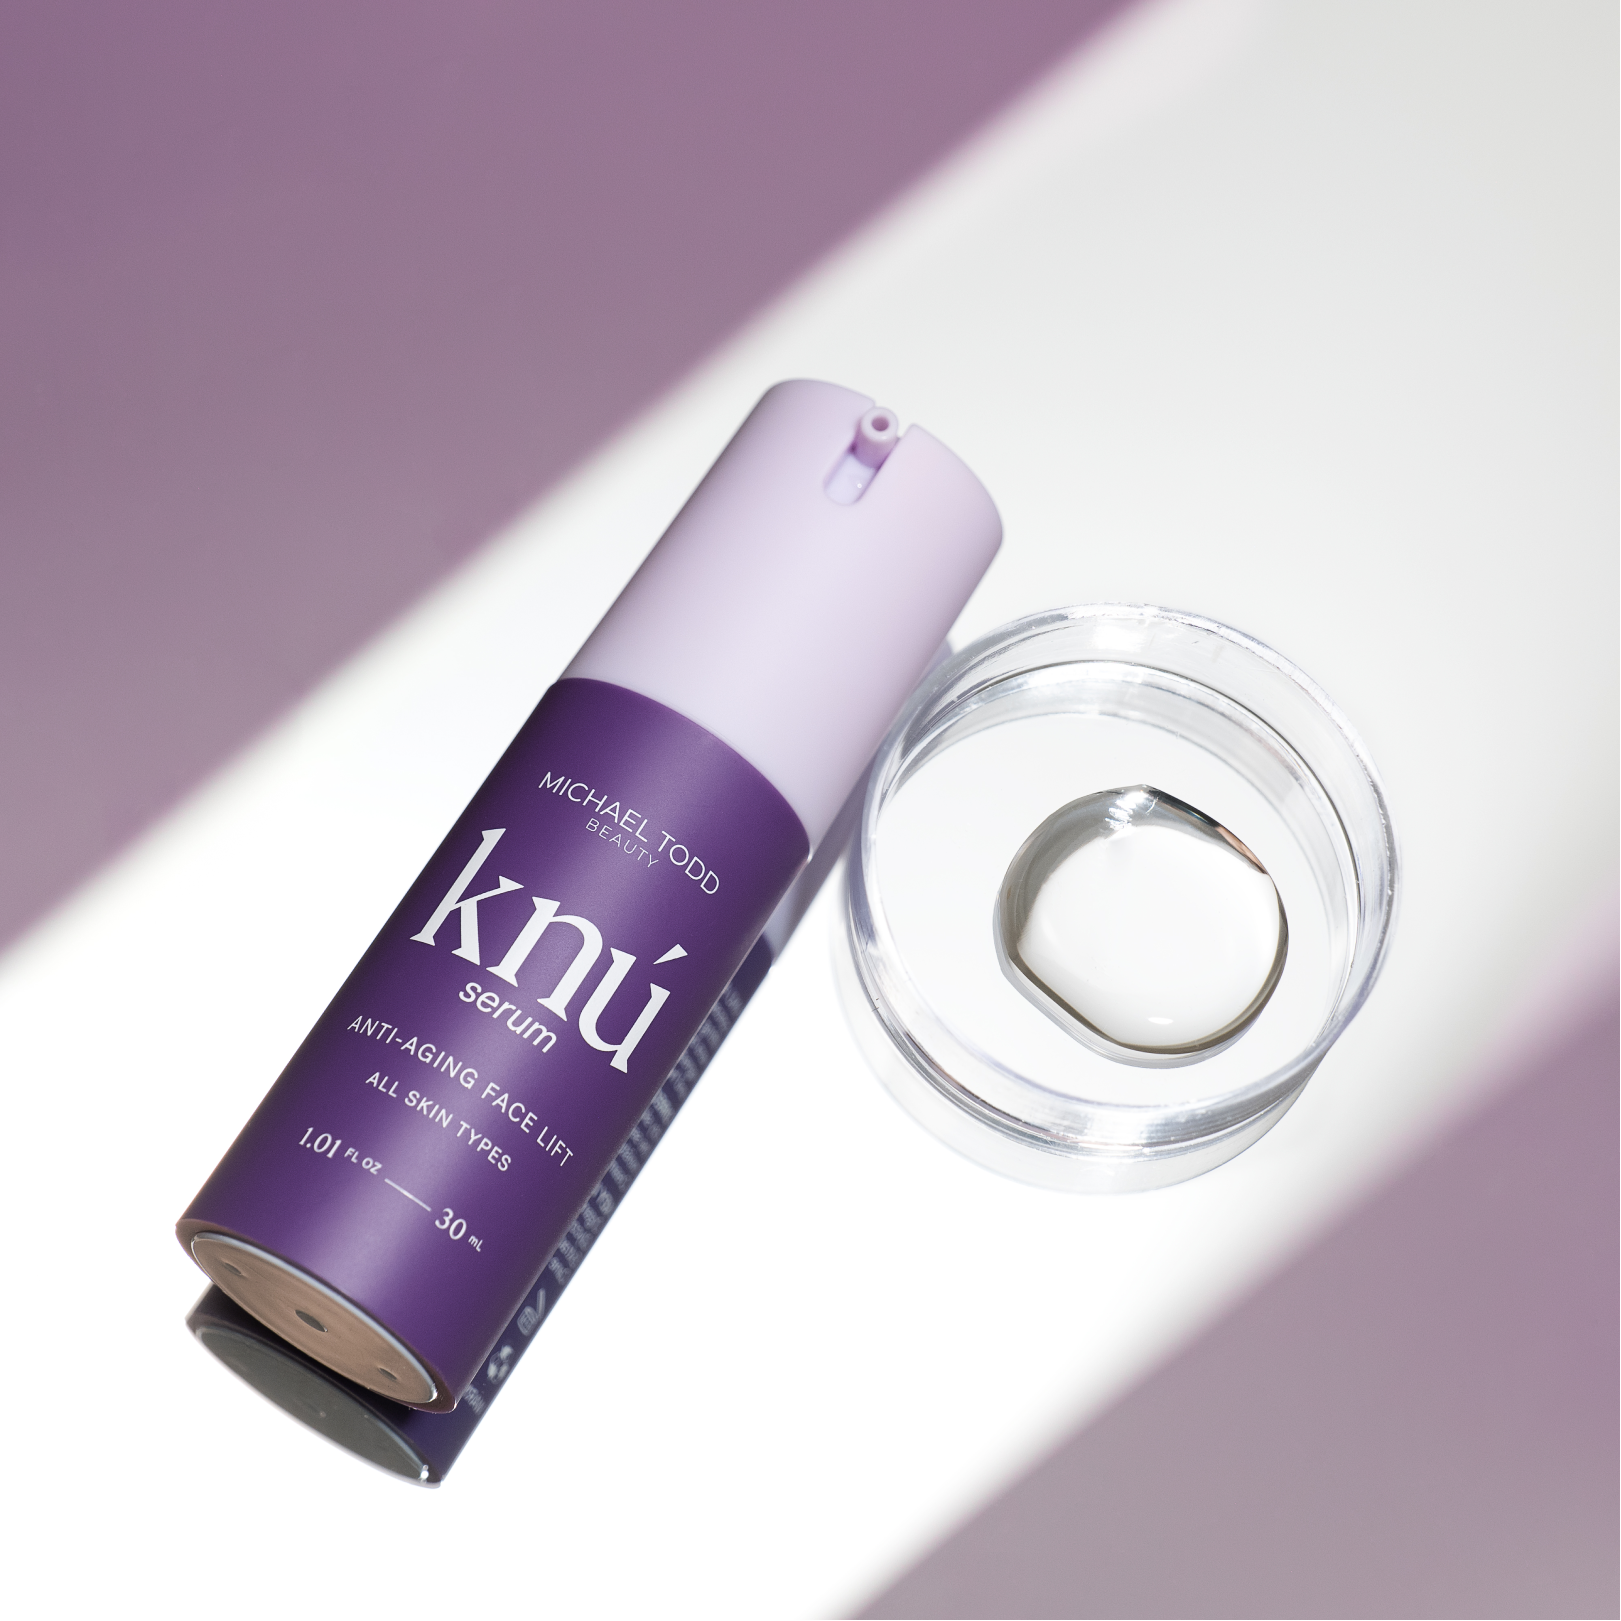 A bottle of Knú Ageless Duo serum with a Michael Todd Beauty ring next to it.